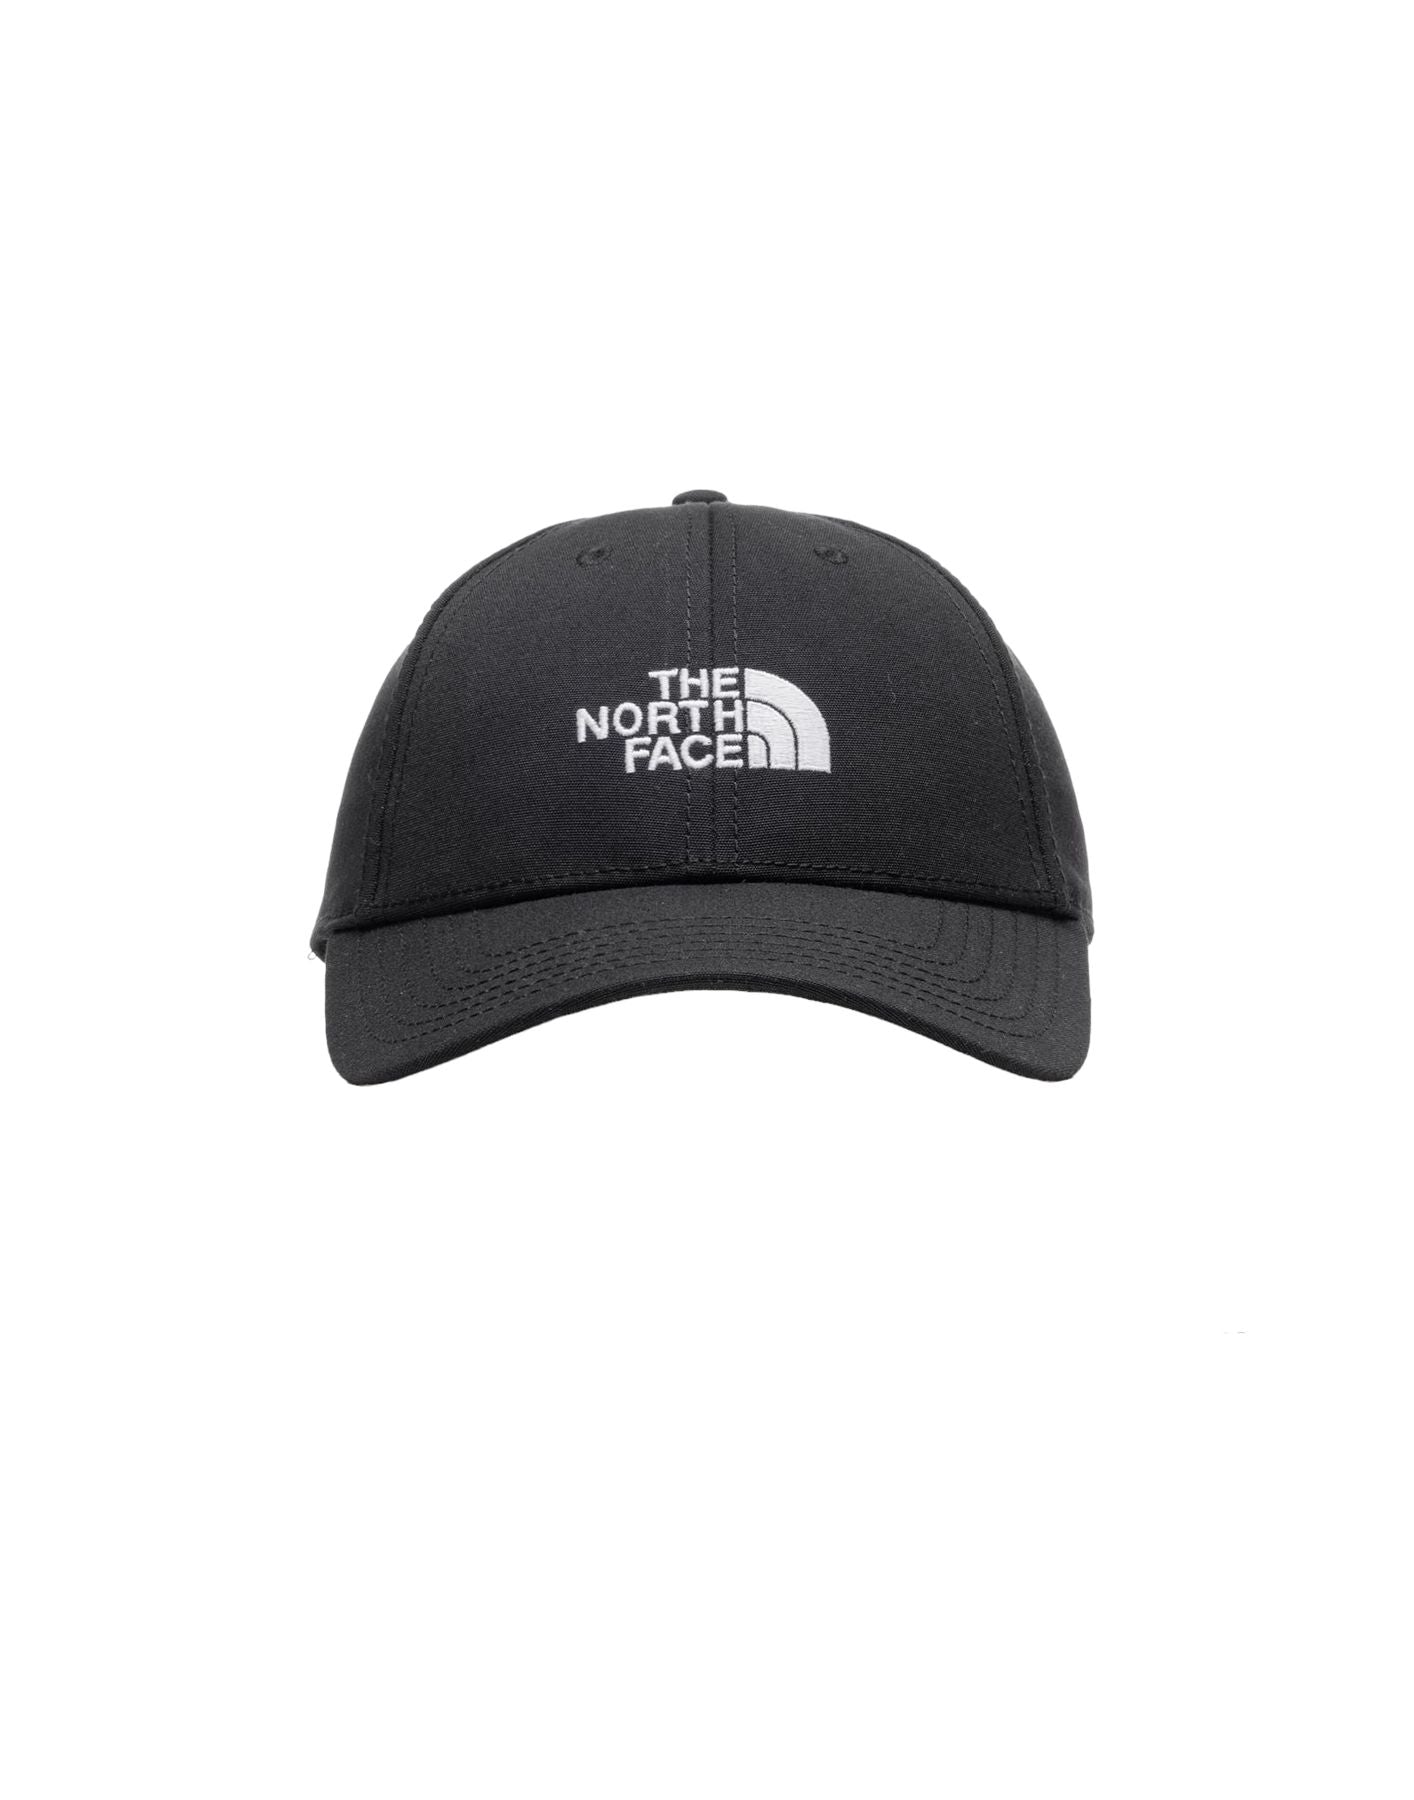 Cap unisex nf0a4vsvky4 negro The North Face